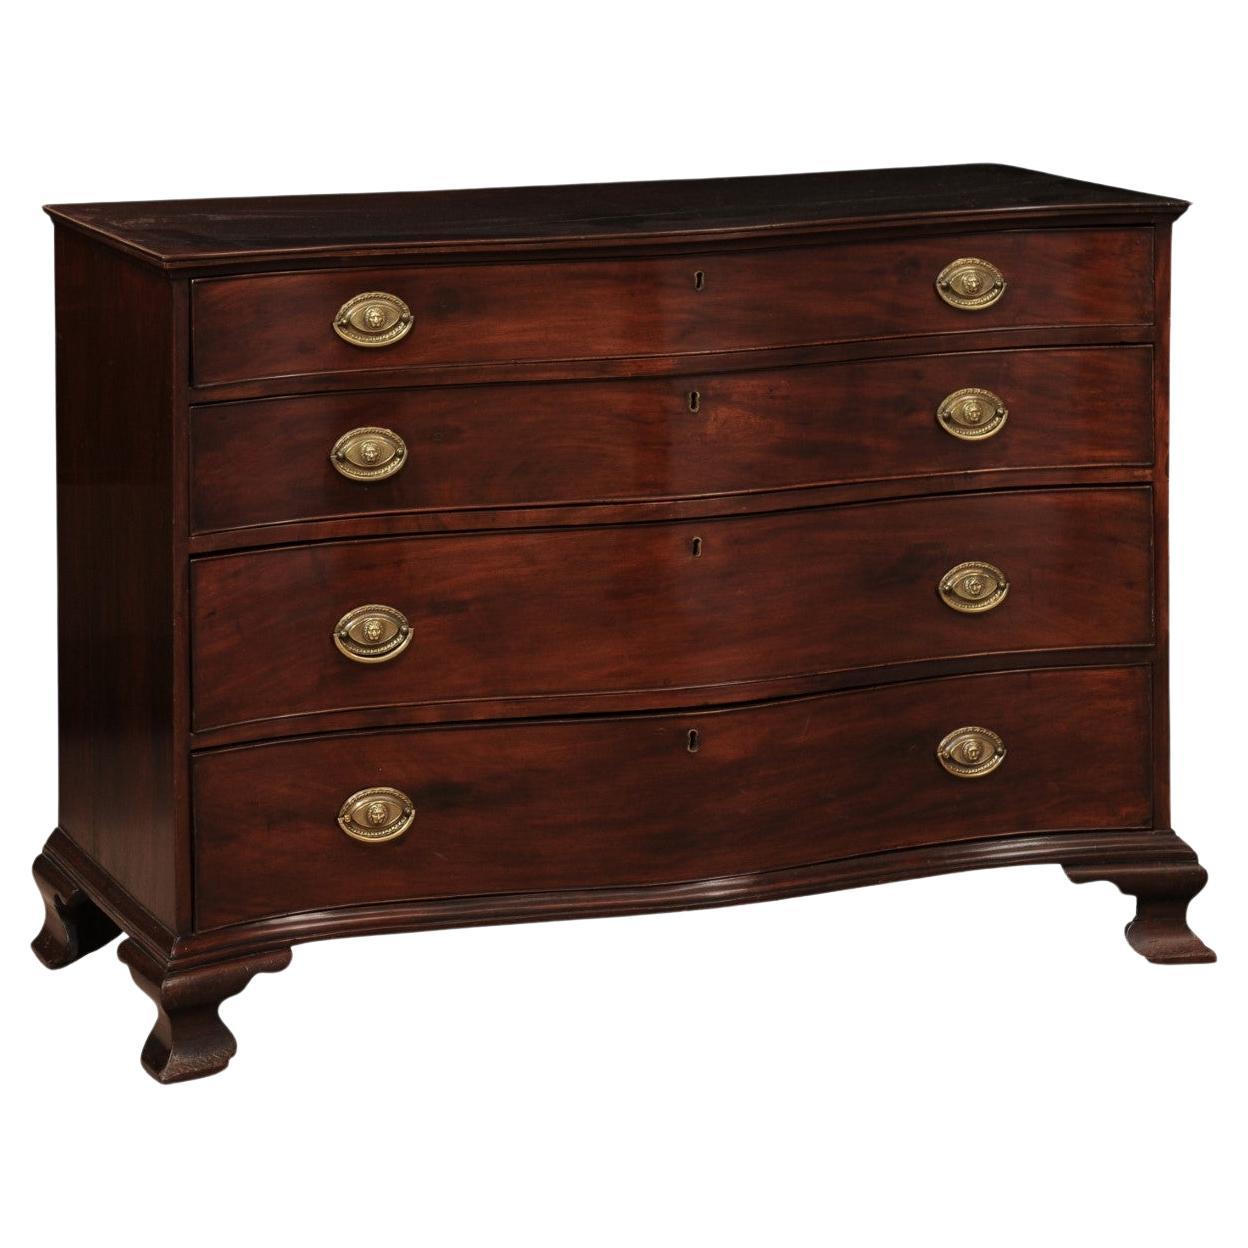 19th Century English George III Style Serpentine Chest in Mahogany For Sale